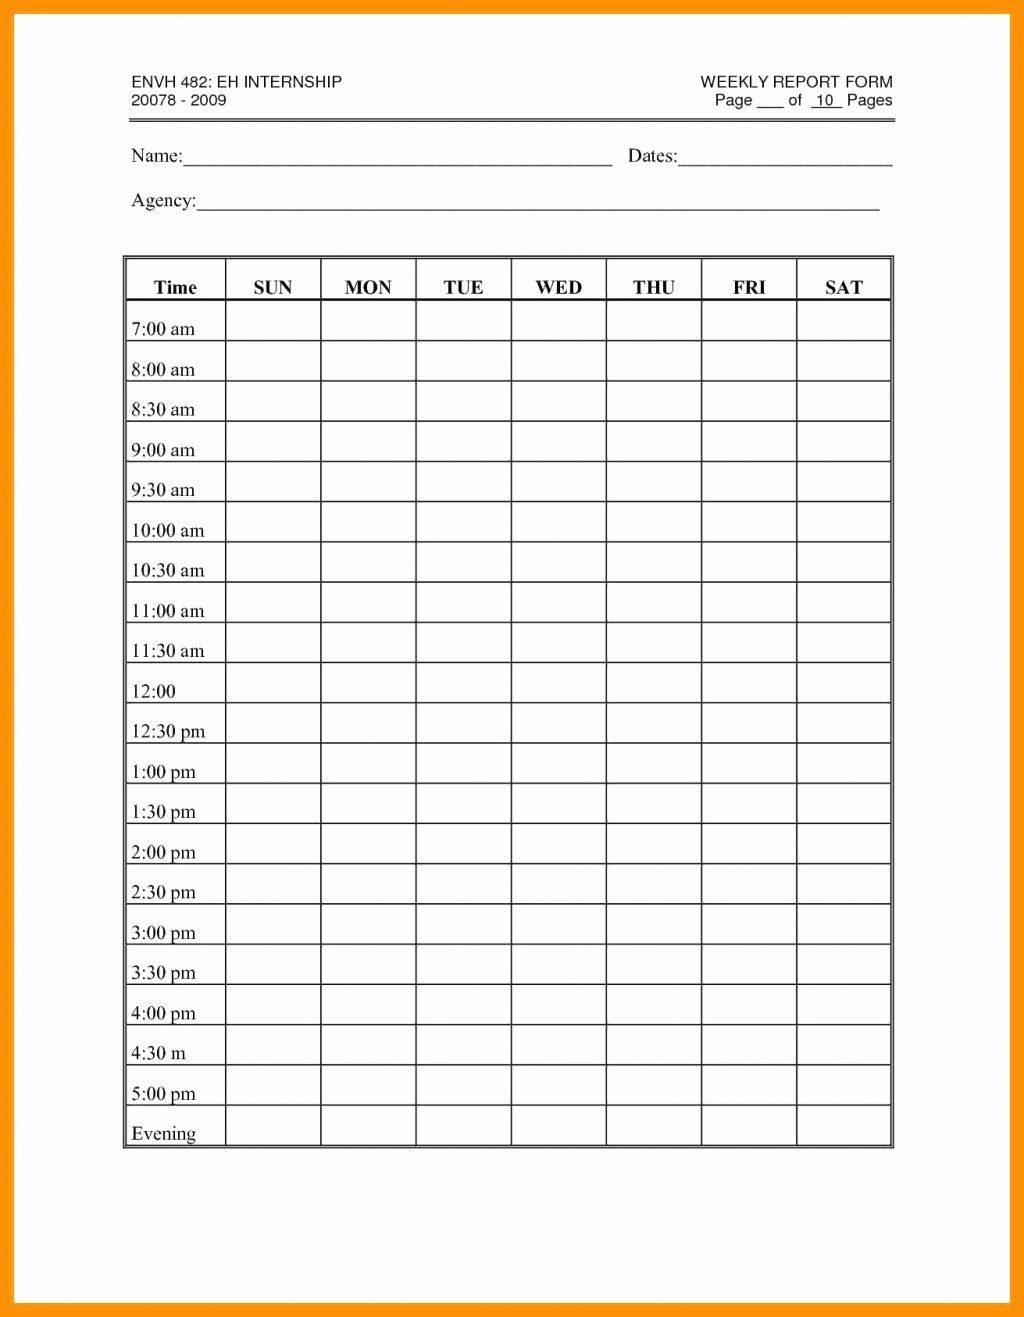 free-group-weight-loss-spreadsheet-template-db-excel